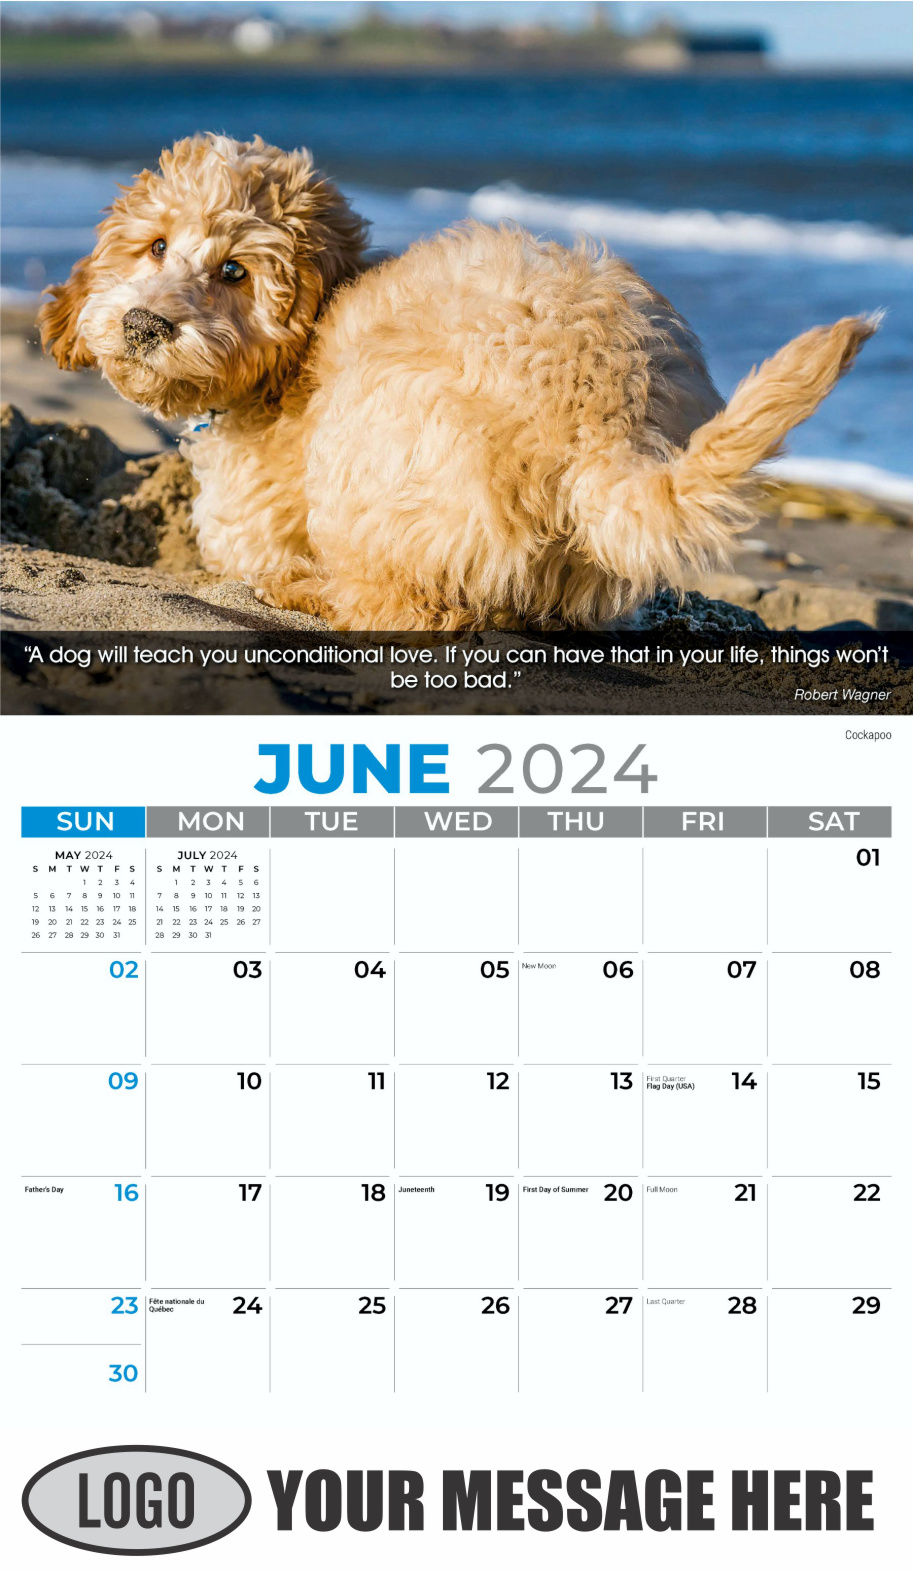 Dogs 2024 Vets and Pets Business Promotion Calendar - June